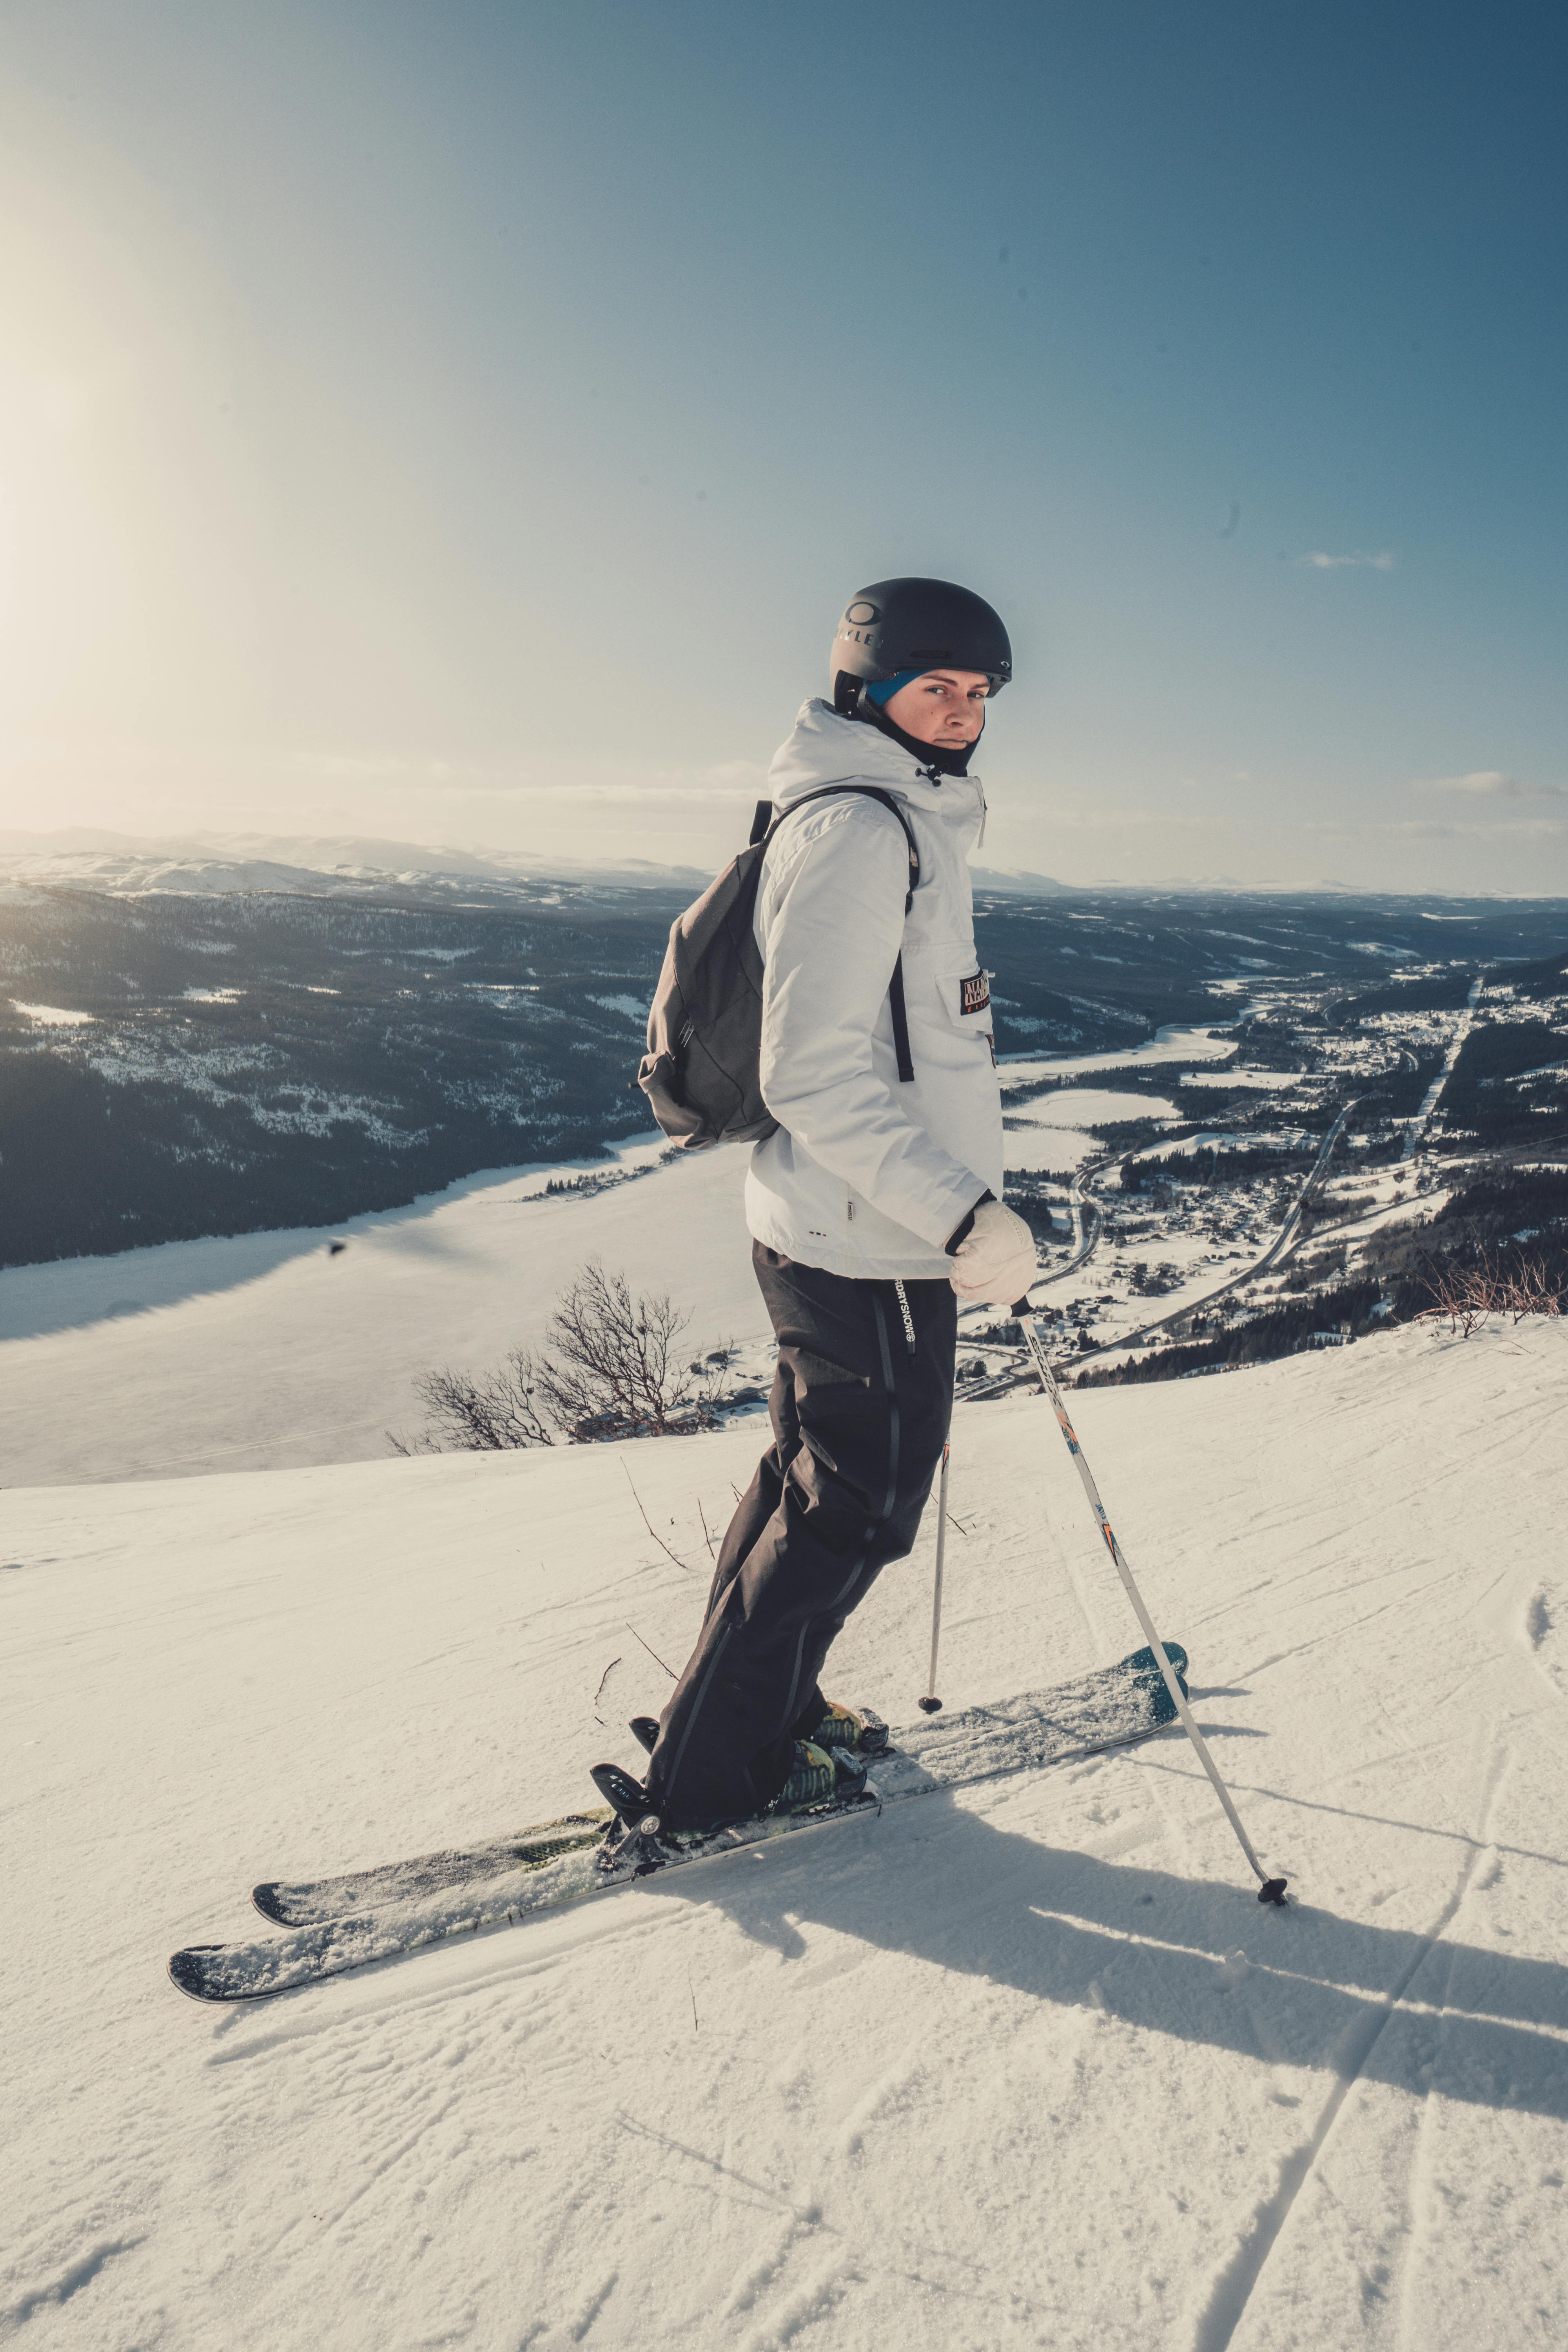 a photo of a person skiing